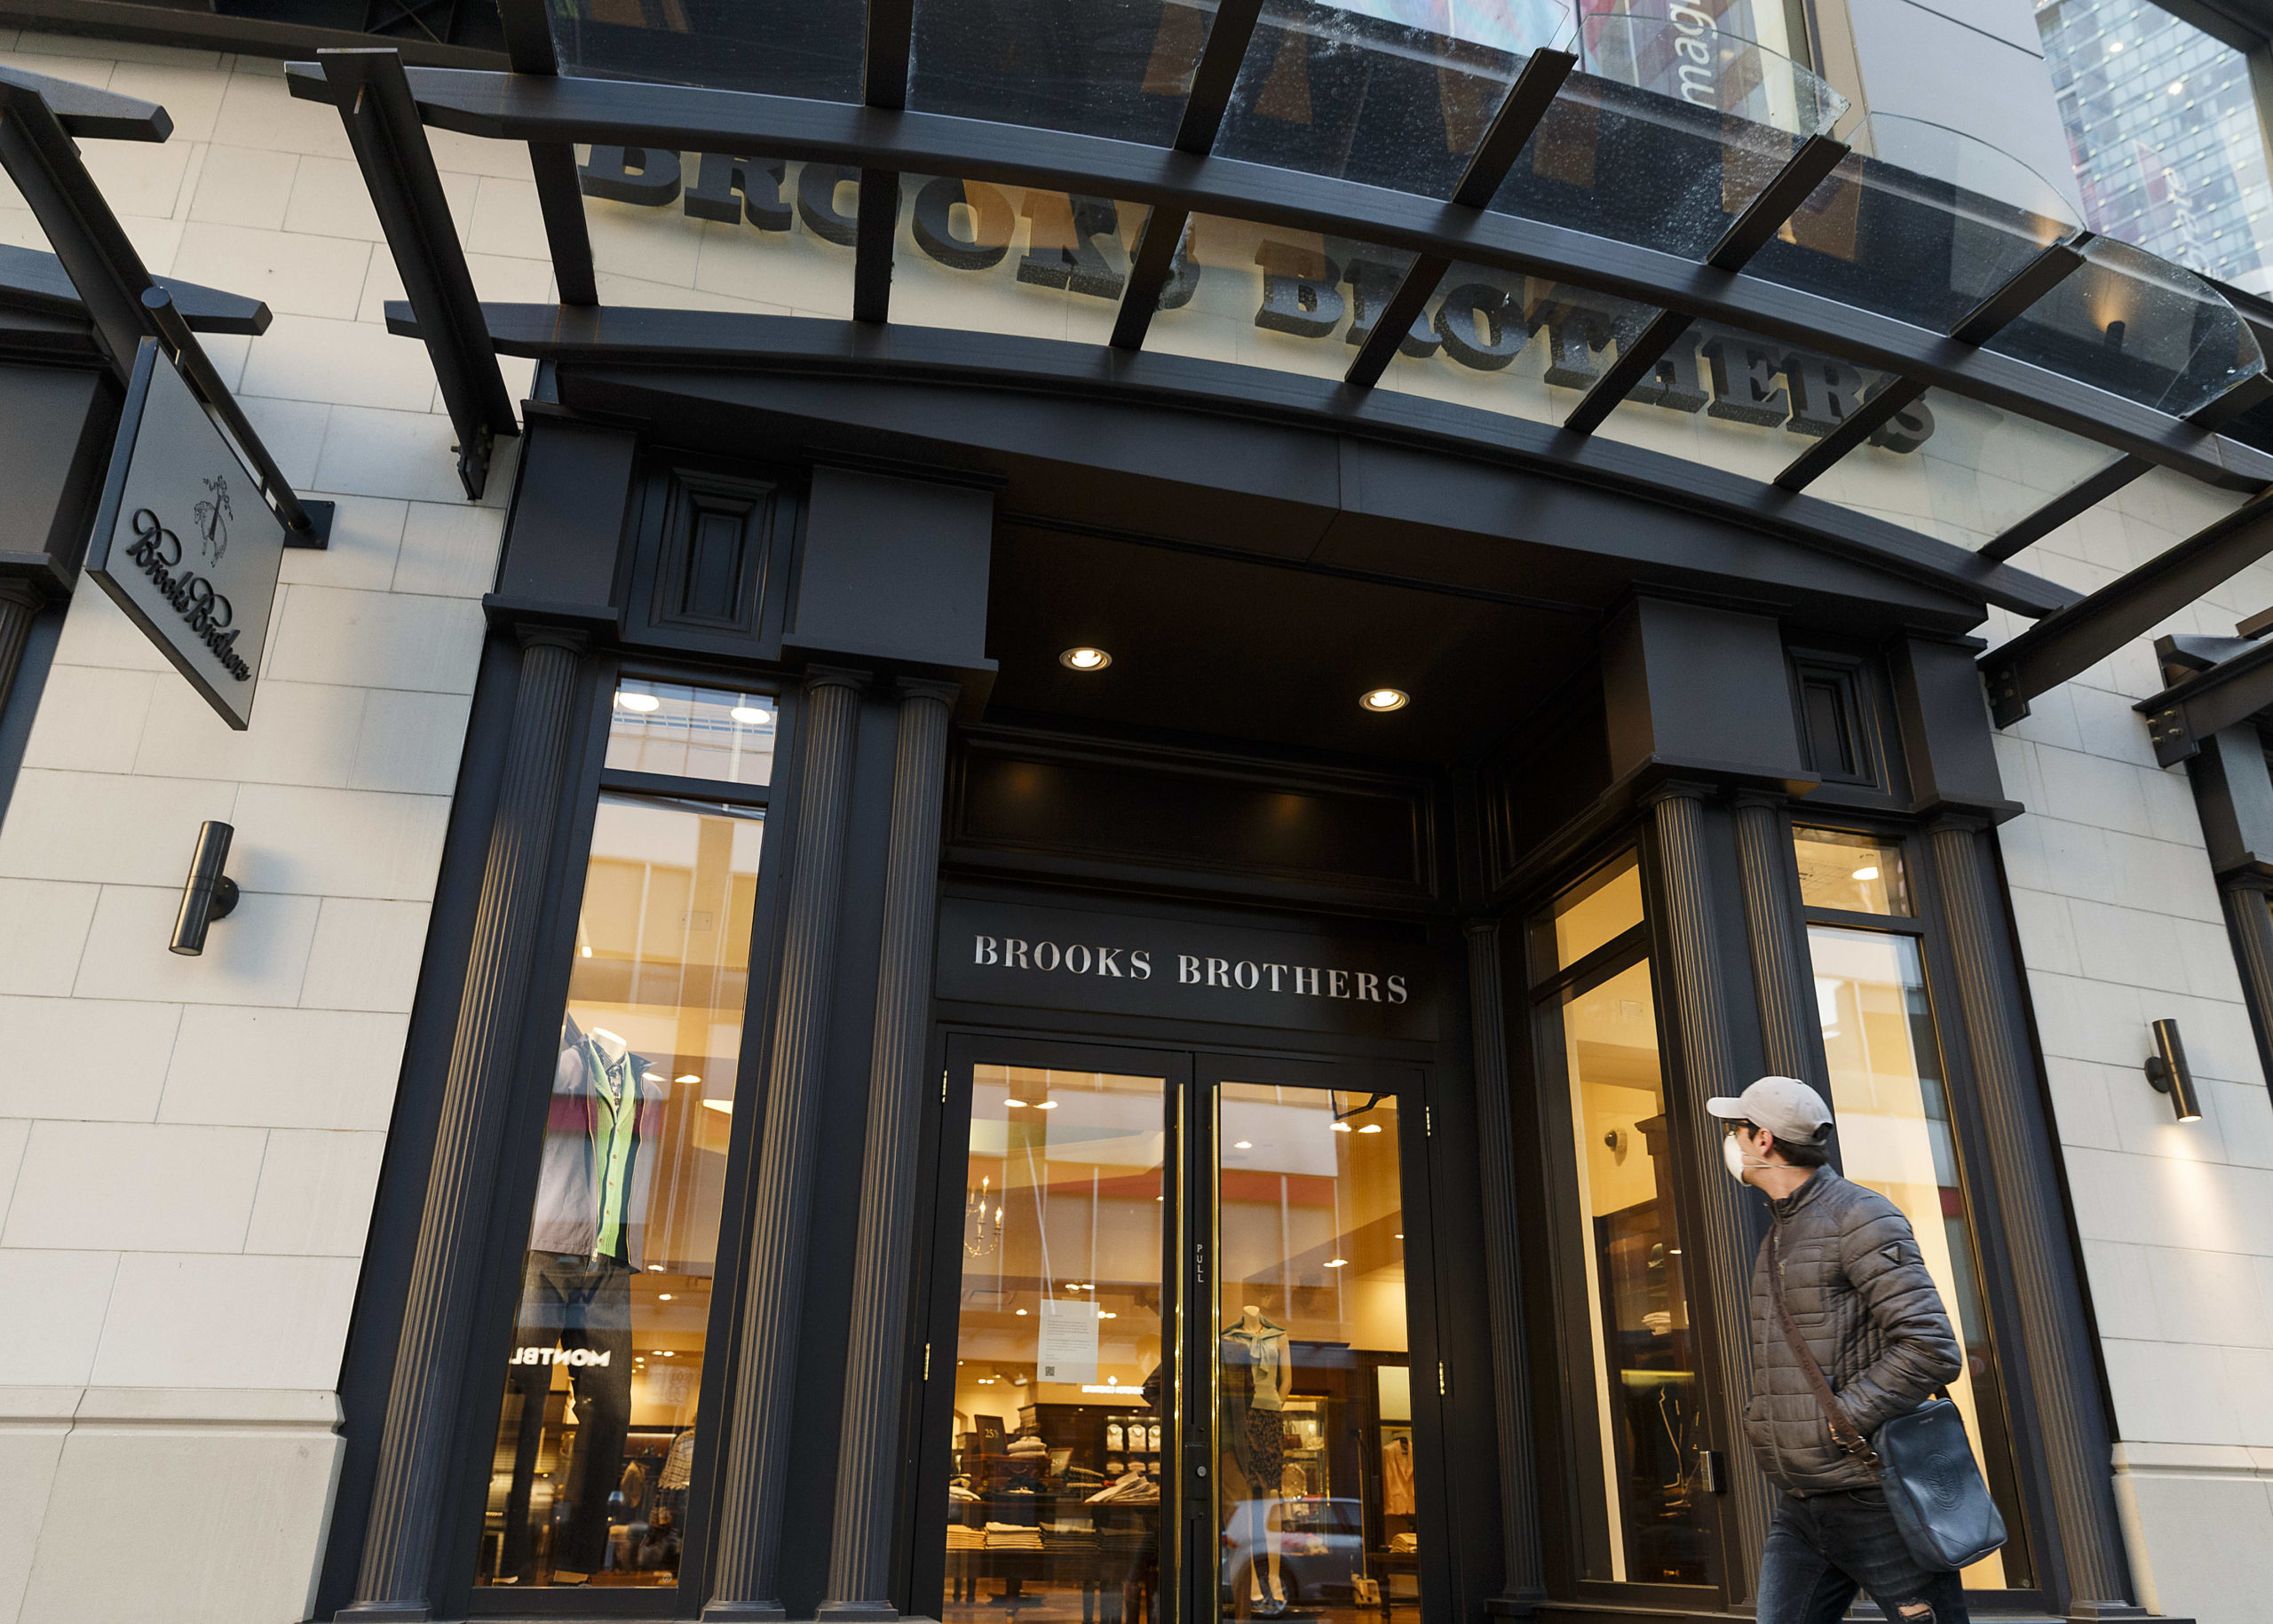 Brooks Brothers seeks potential chapter financing amid sale course of